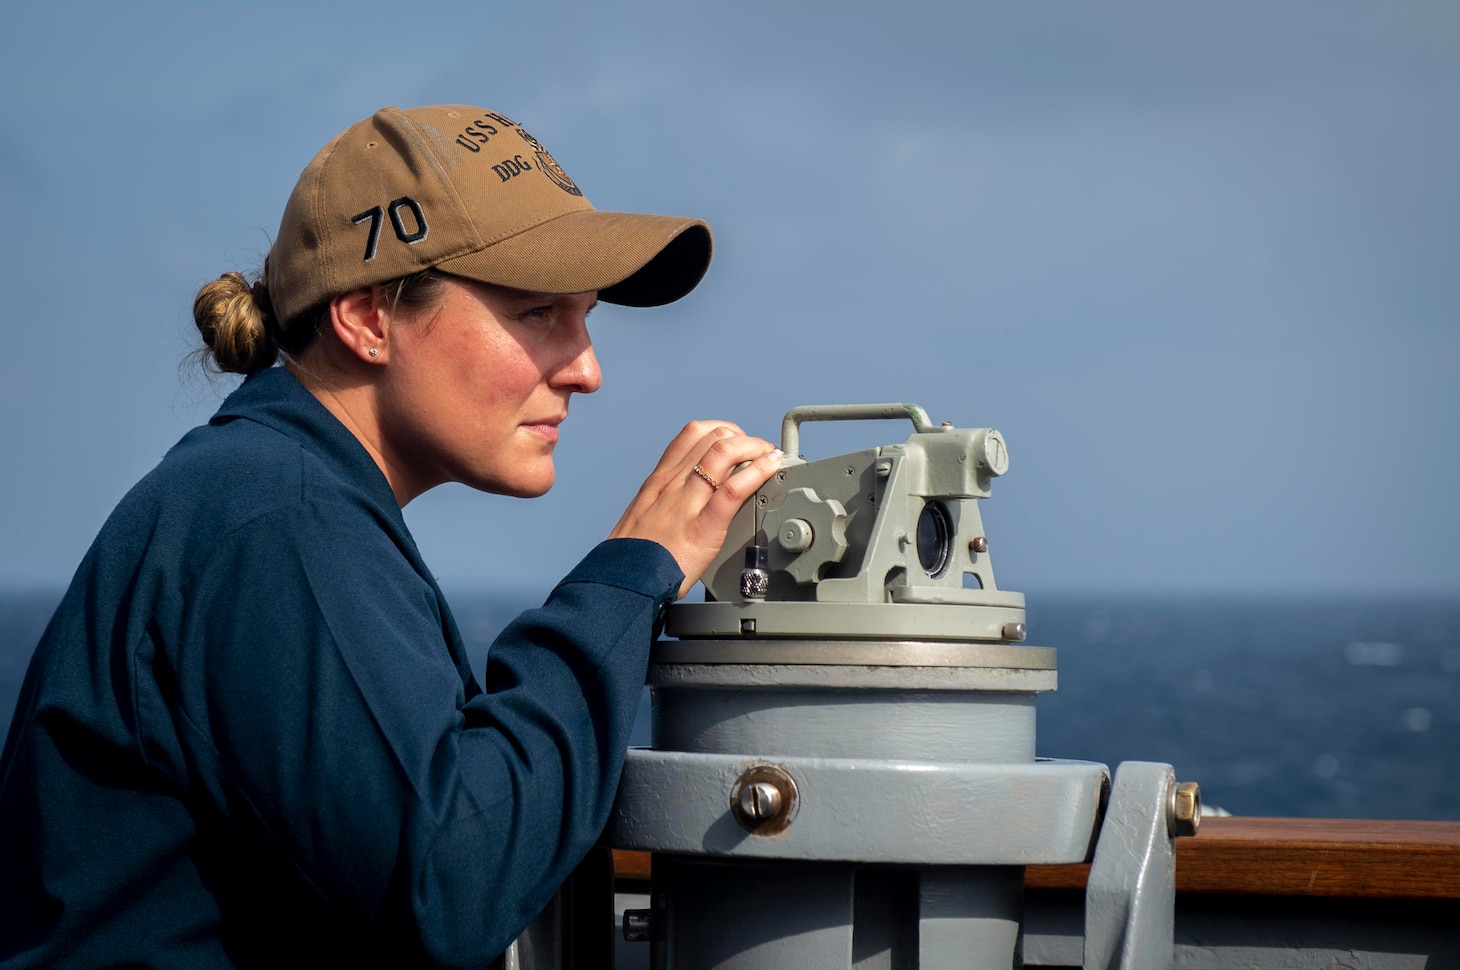 231125-N-EE352-2109

SOUTH CHINA SEA (Nov. 25, 2023) – Lt. j.g. Gianna Buenavista, from Alamo, California, observes with an alidade telescope in the portside bridge lookout aboard the Arleigh Burke-class guided-missile destroyer USS Hopper (DDG 70) while conducting routine underway operations. Hopper is forward-deployed to the U.S. 7th Fleet area of operations in support of a free and open Indo-Pacific. (U.S. Navy photo by Mass Communication Specialist 2nd Class Leon Vonguyen)